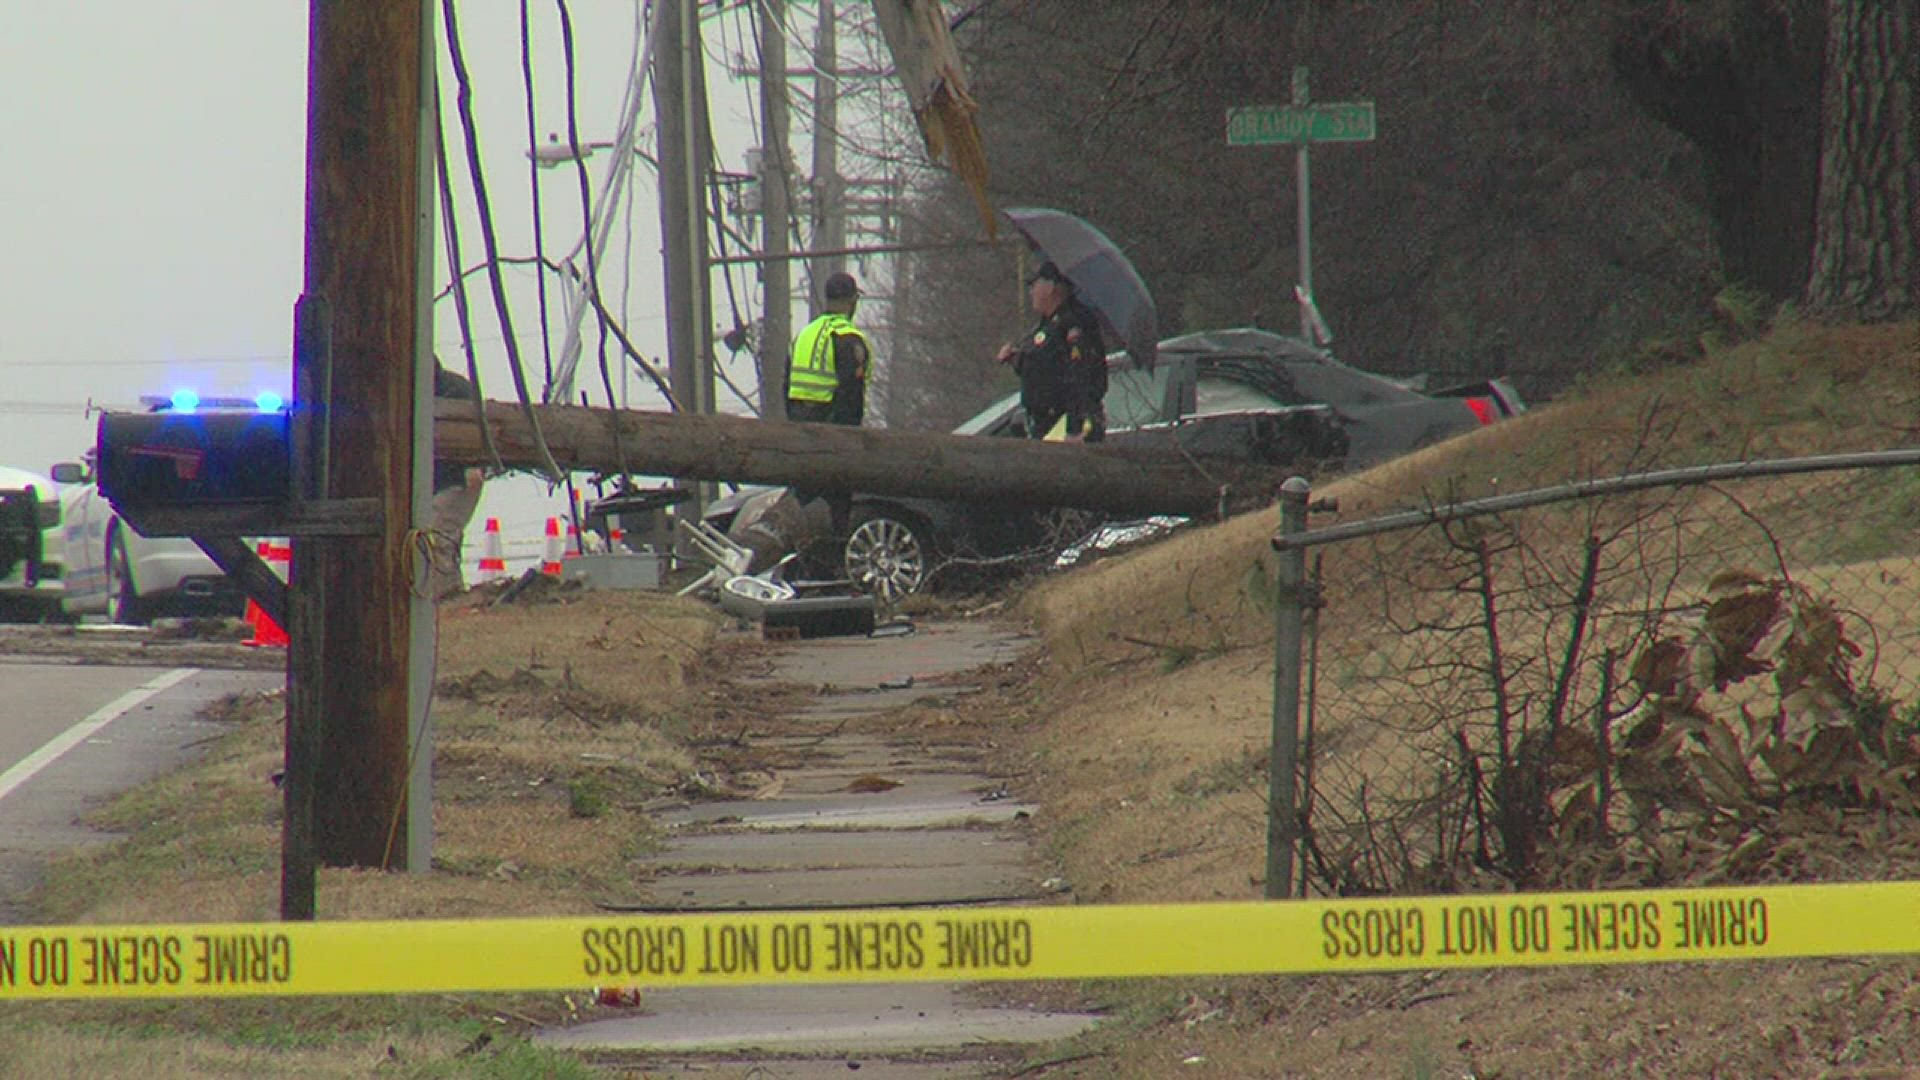 Eastbound lanes of Shelby Dr. were shut down for several hours while officers investigated the crash.